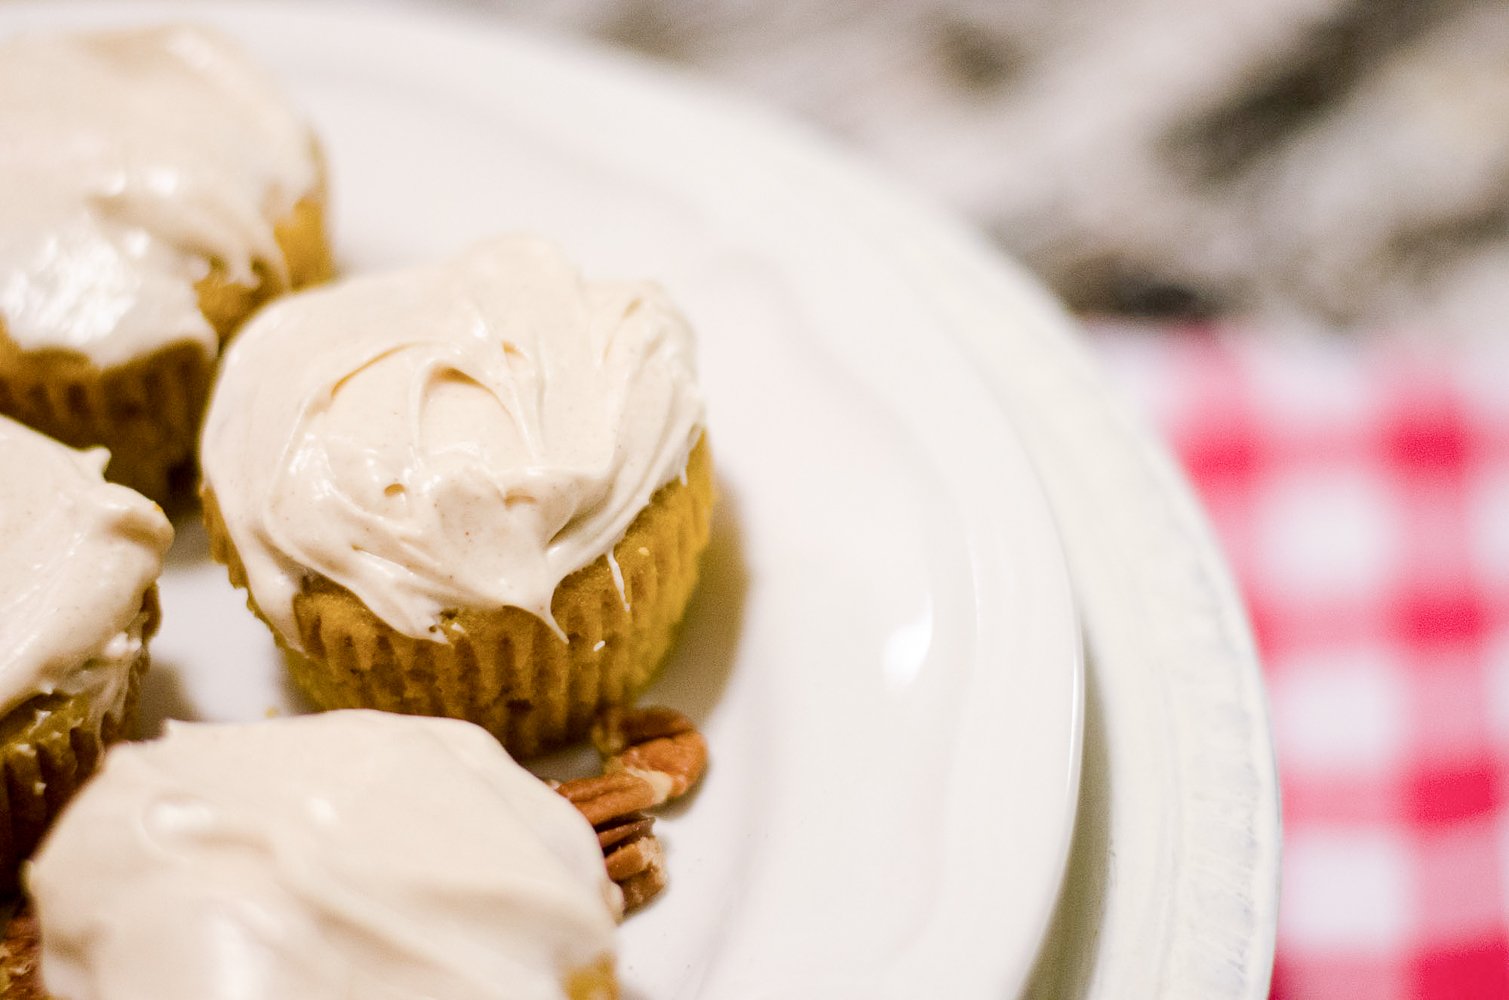 The Kentucky Gent, a Louisville, Kentucky life and style blogger, shares his recipe for Brown Butter Pumpkin Cupcakes with Cinnamon Cream Cheese Frosting.